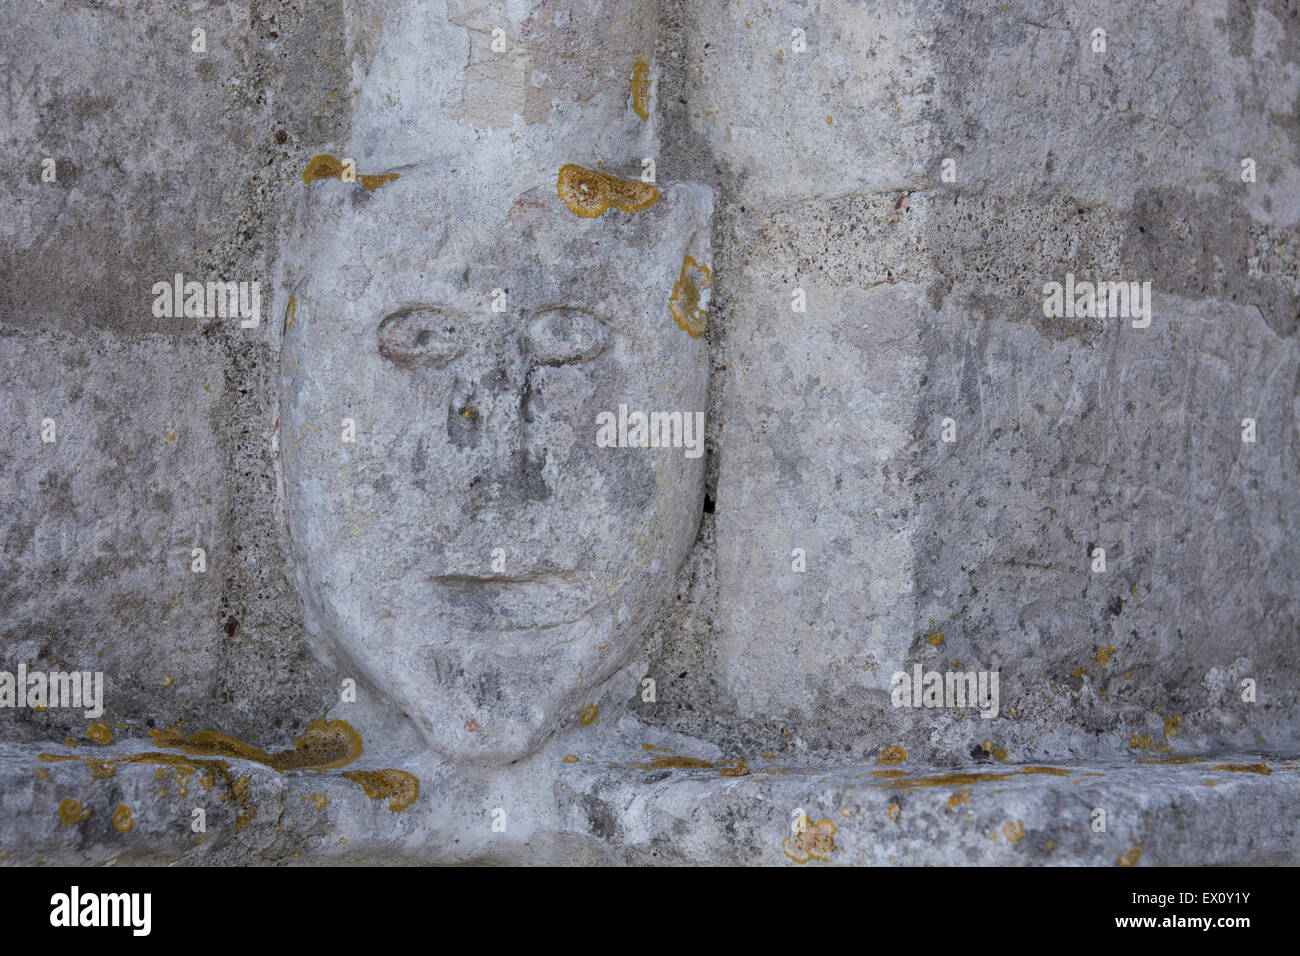 A gargoyle effigy face sculpture on the wall of the old church of Højerup in Denmark Stock Photo